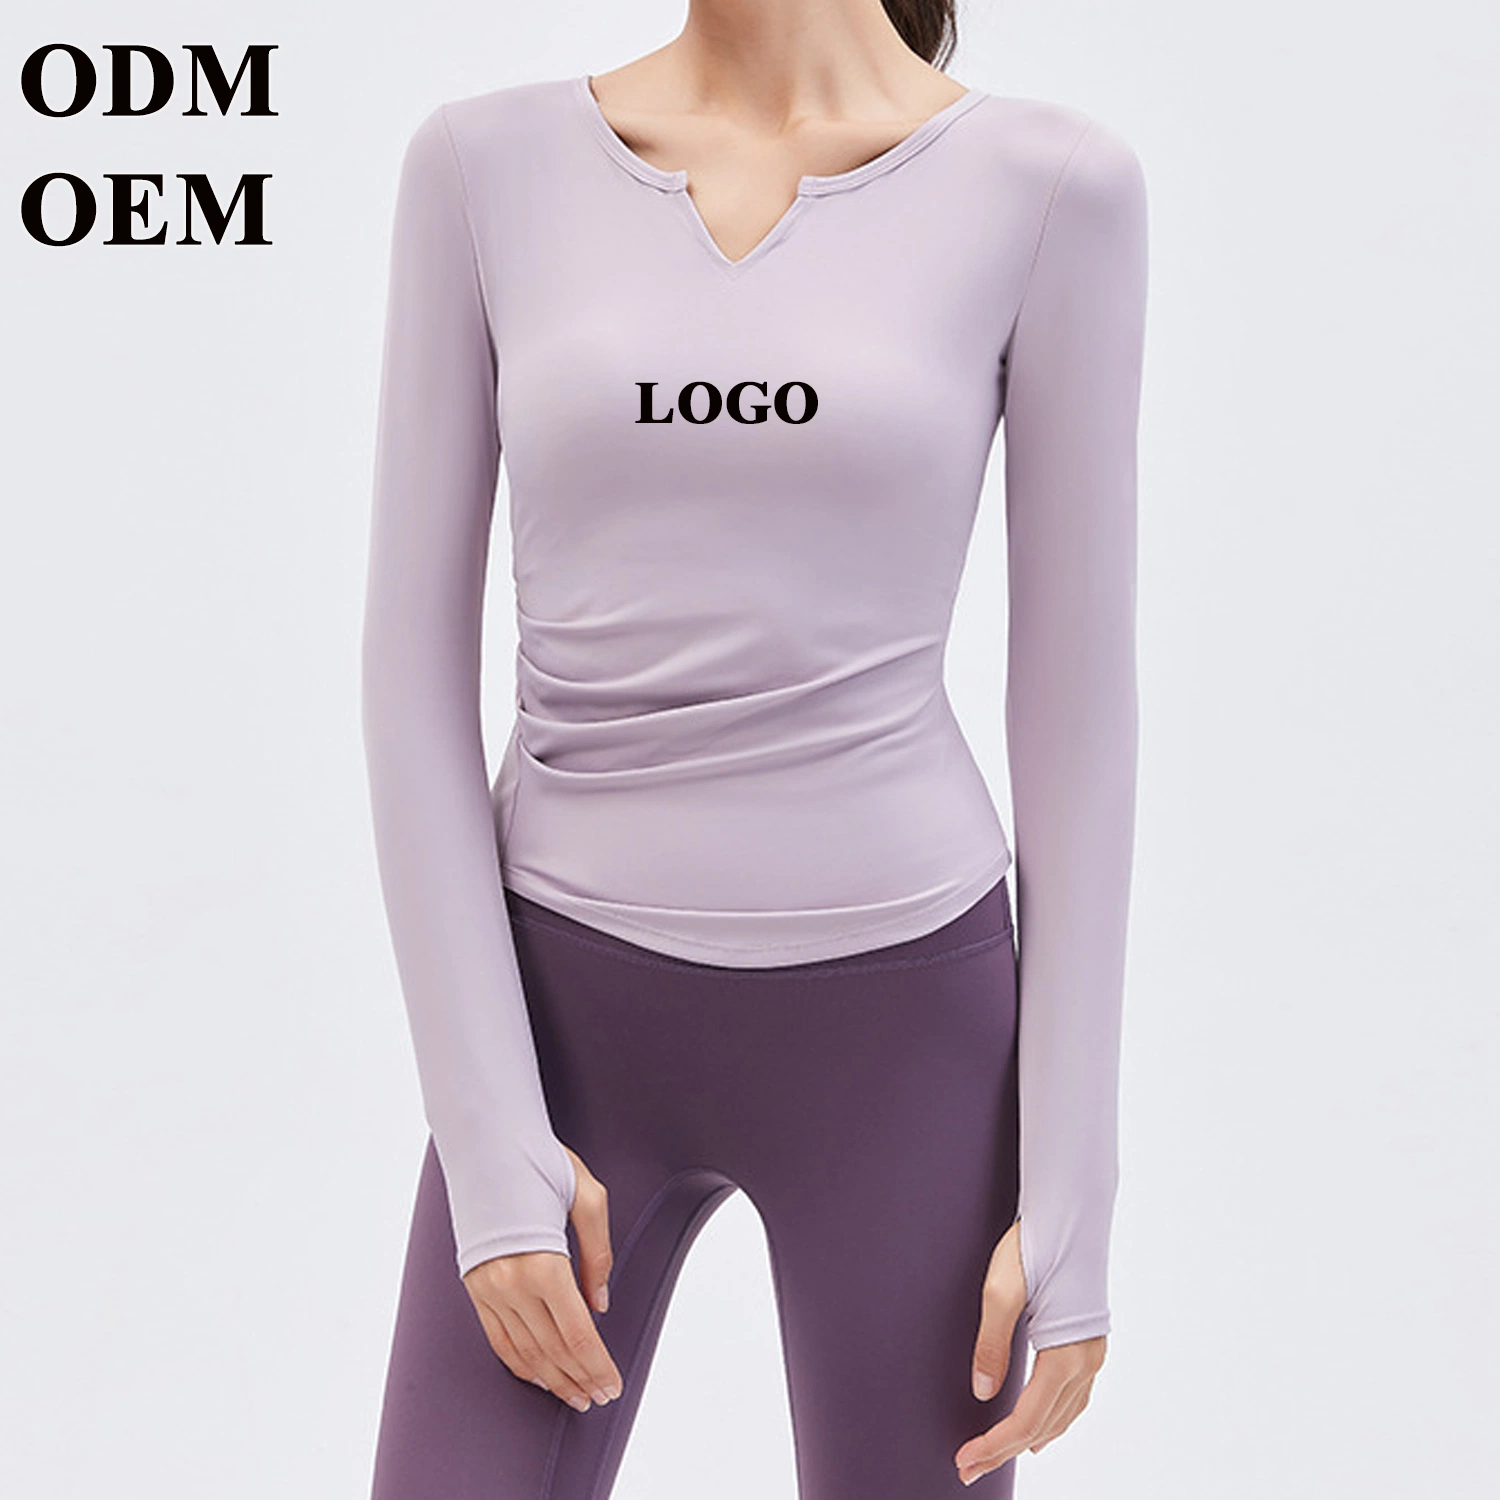 Women&prime; S Yoga Long Sleeve T-Shirts Workout Top Fitness Wear Gym Clothing Sports Clothes Sportswear